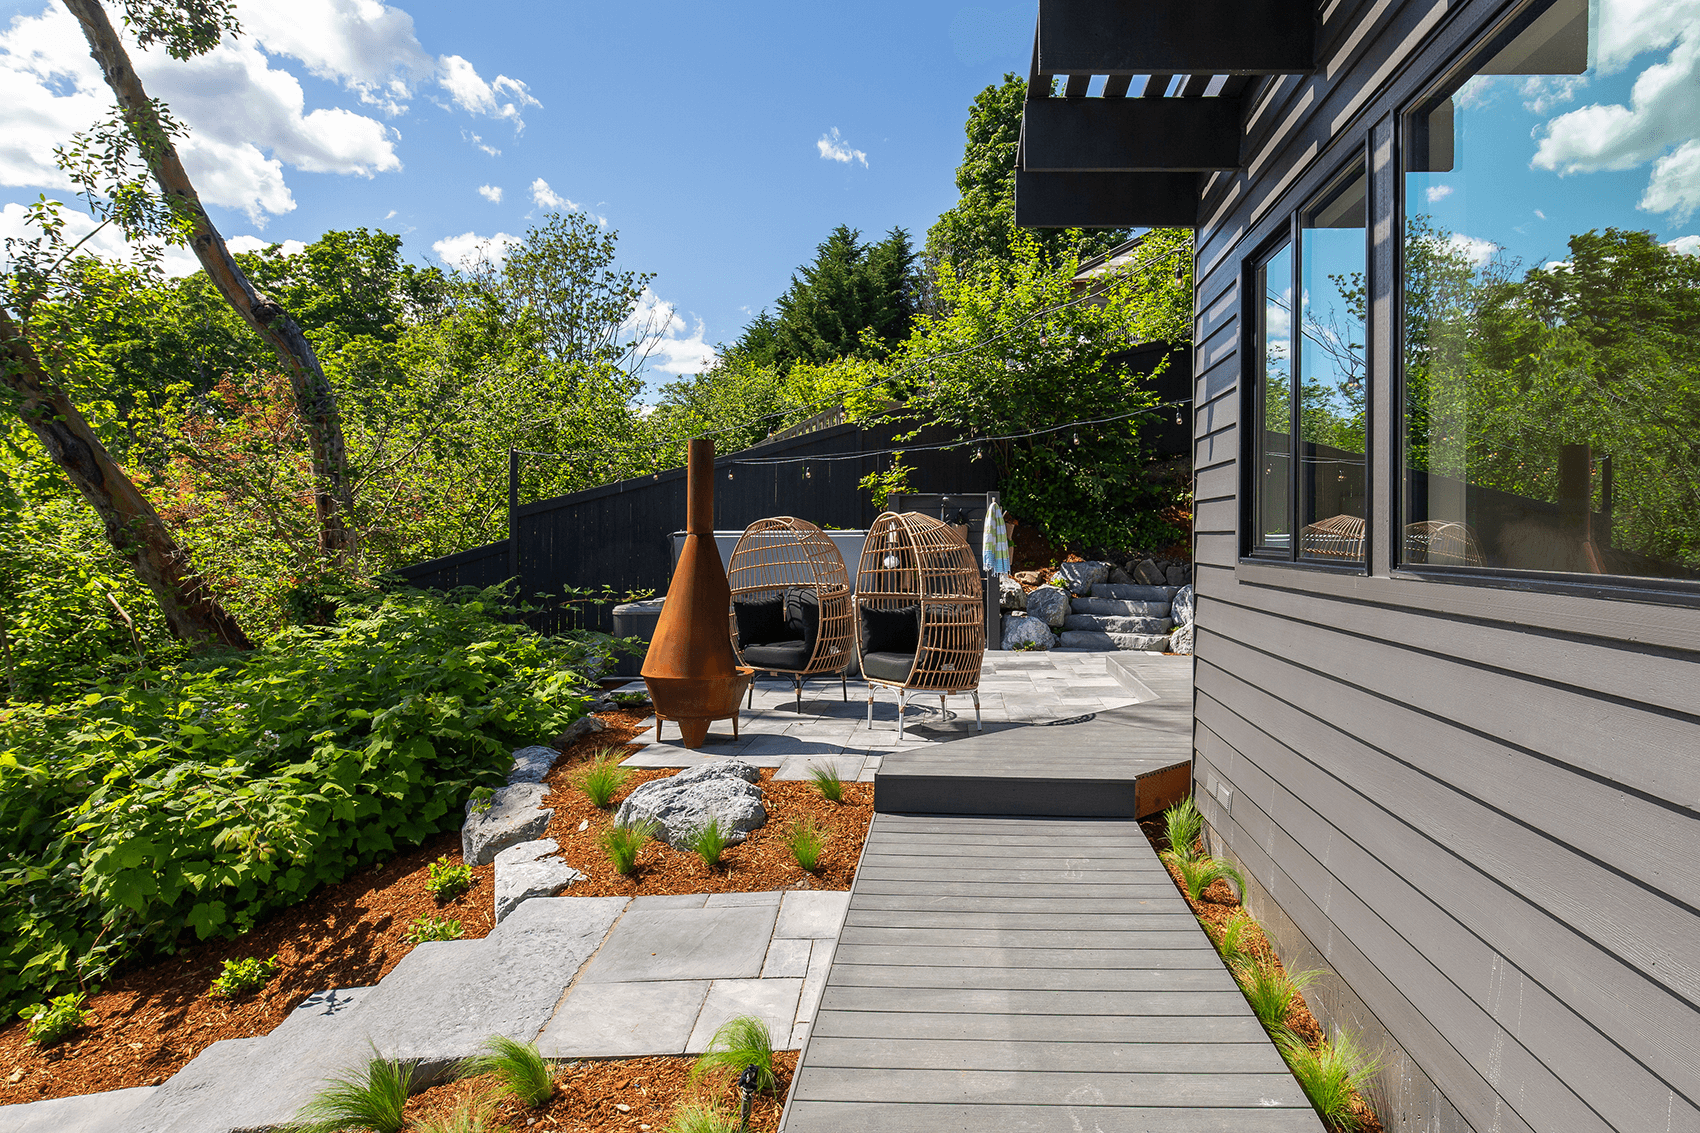 Terrain_Landscaping_Spring-Outdoor-Furniture-Madrona